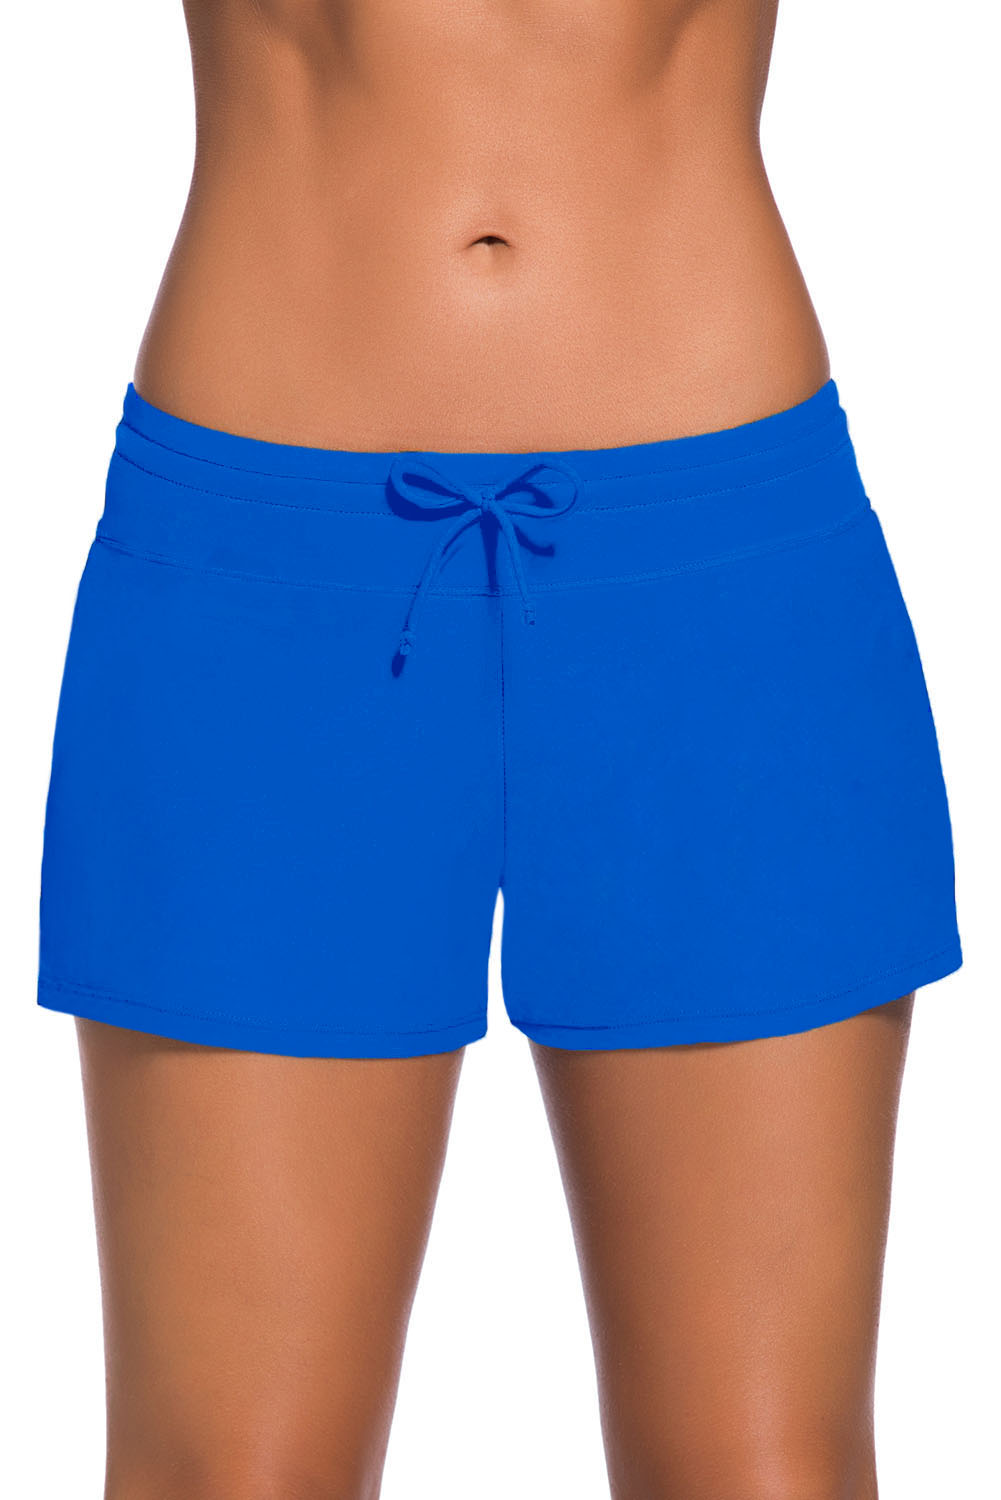 how to tell if shorts are for swimming suits